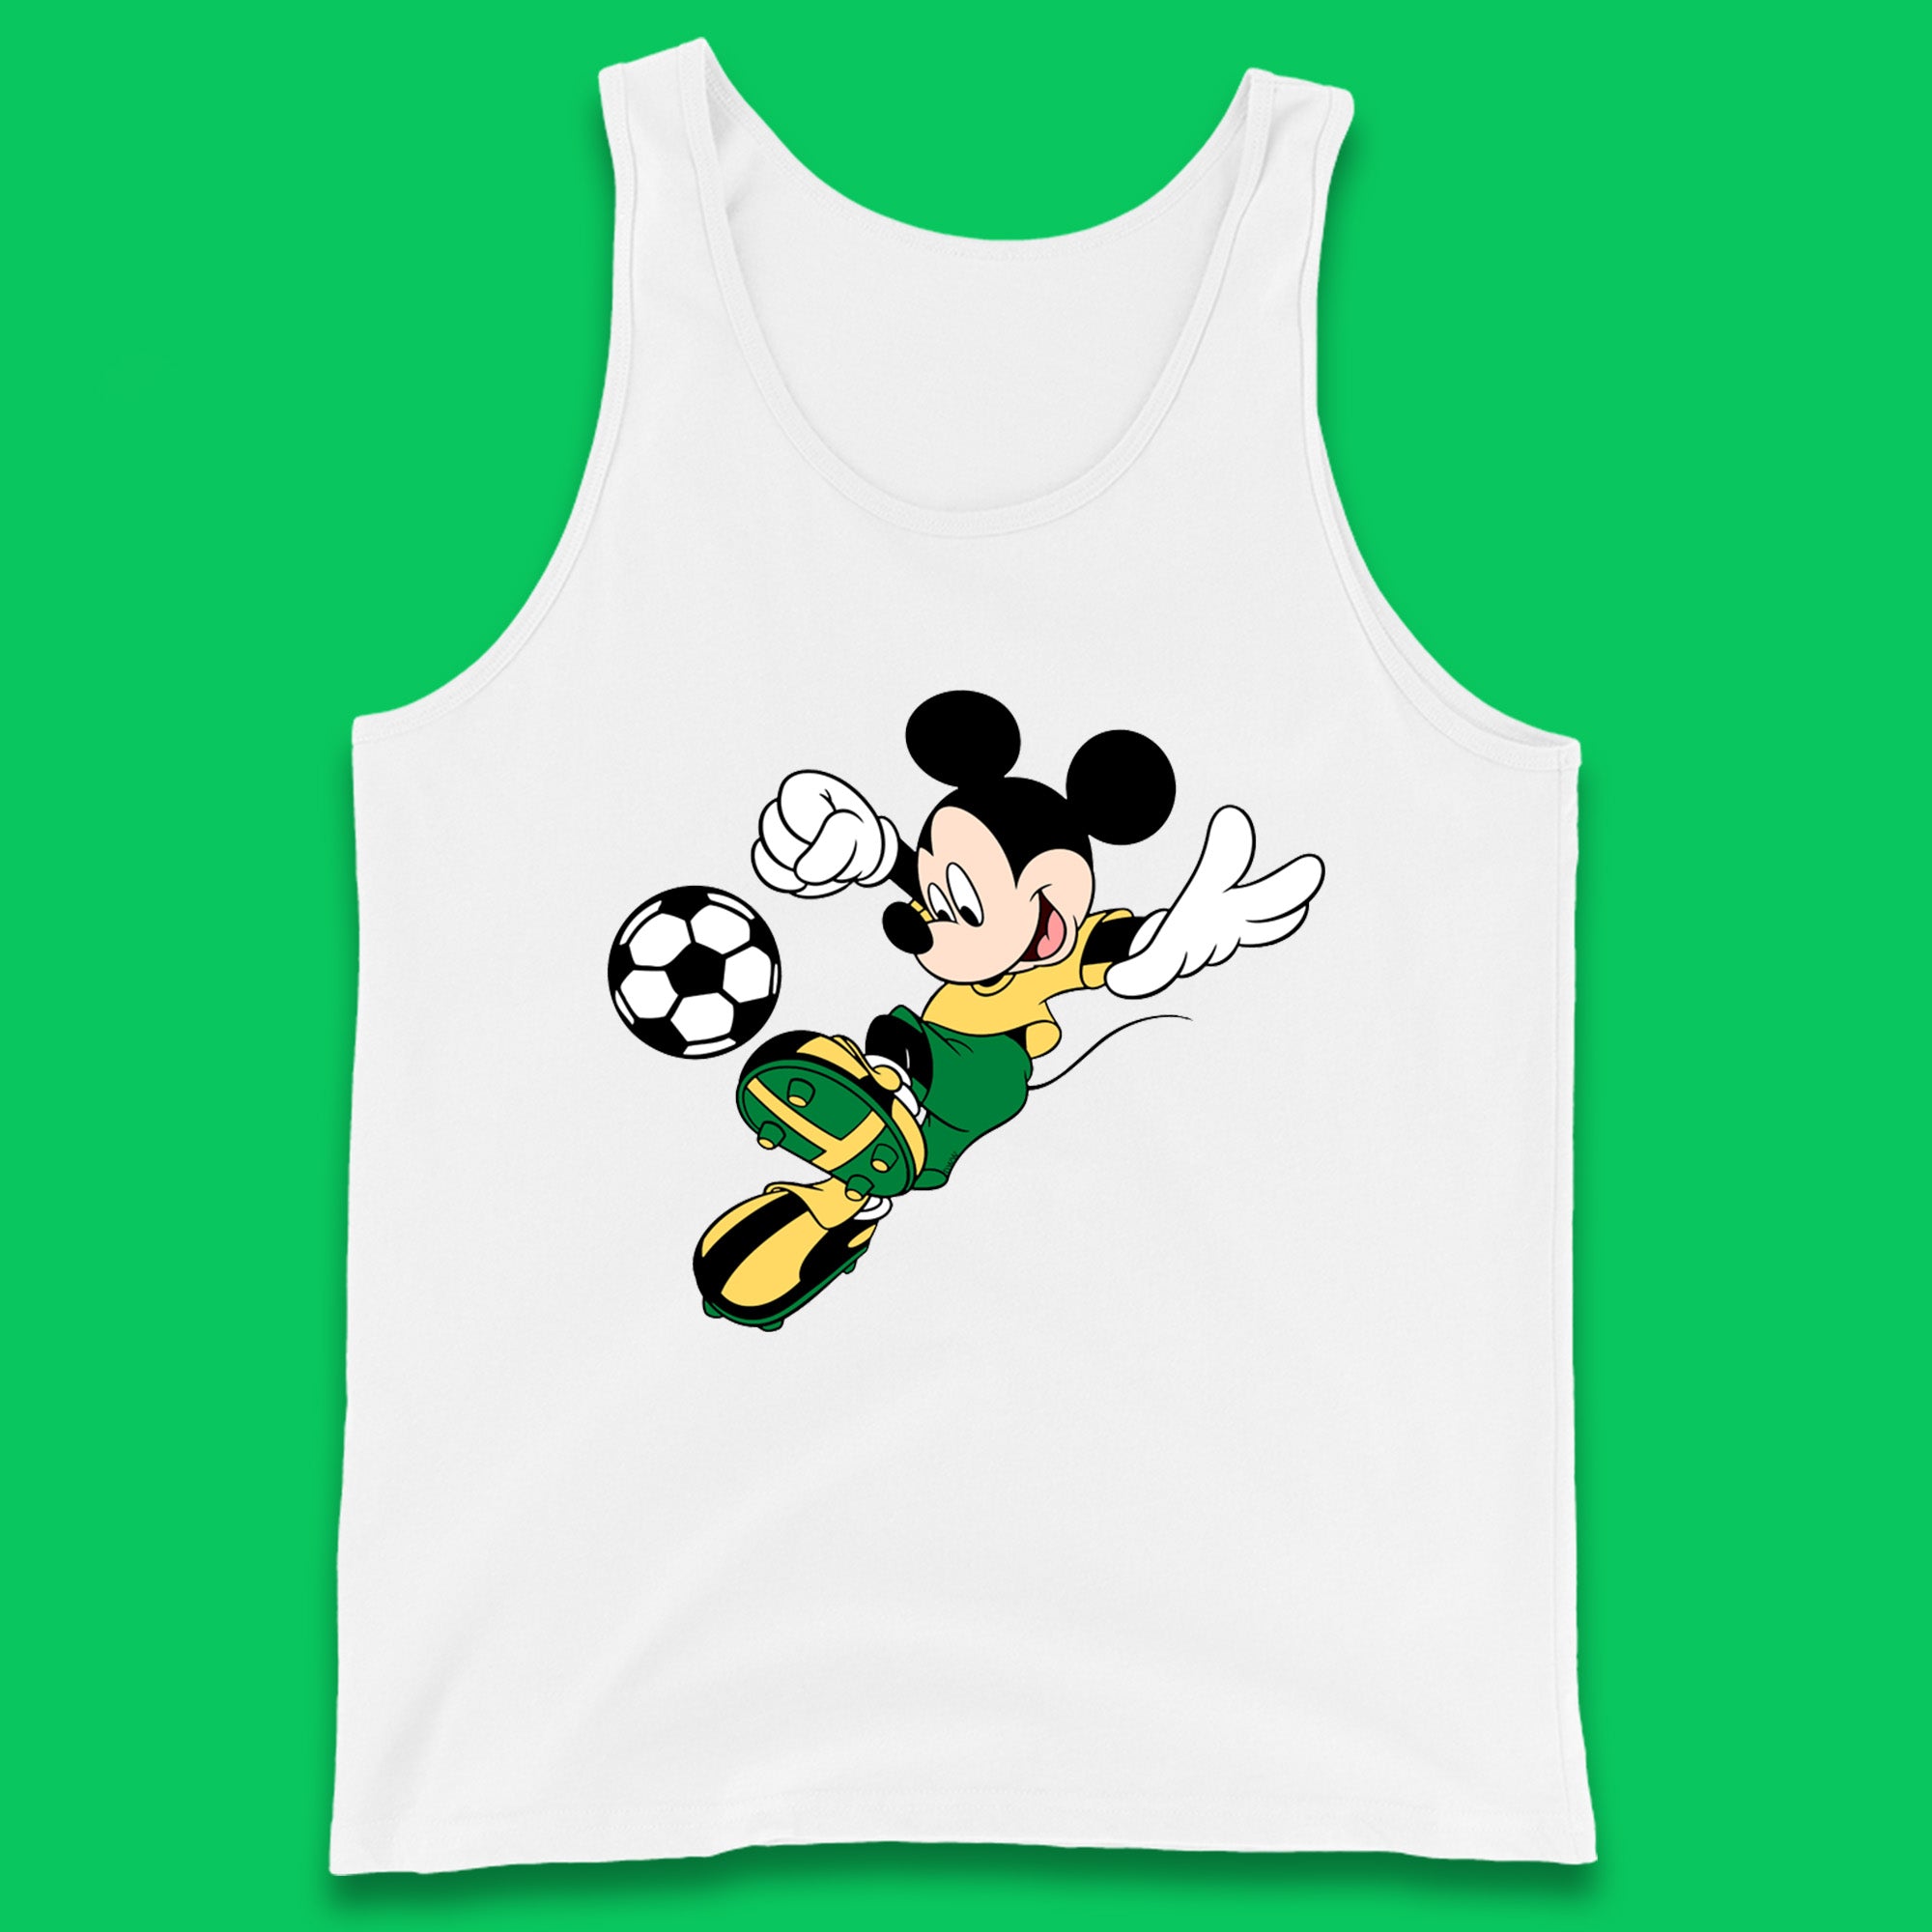 Mickey Mouse Kicking Football Soccer Player Disney Cartoon Mickey Soccer Player Football Team Tank Top